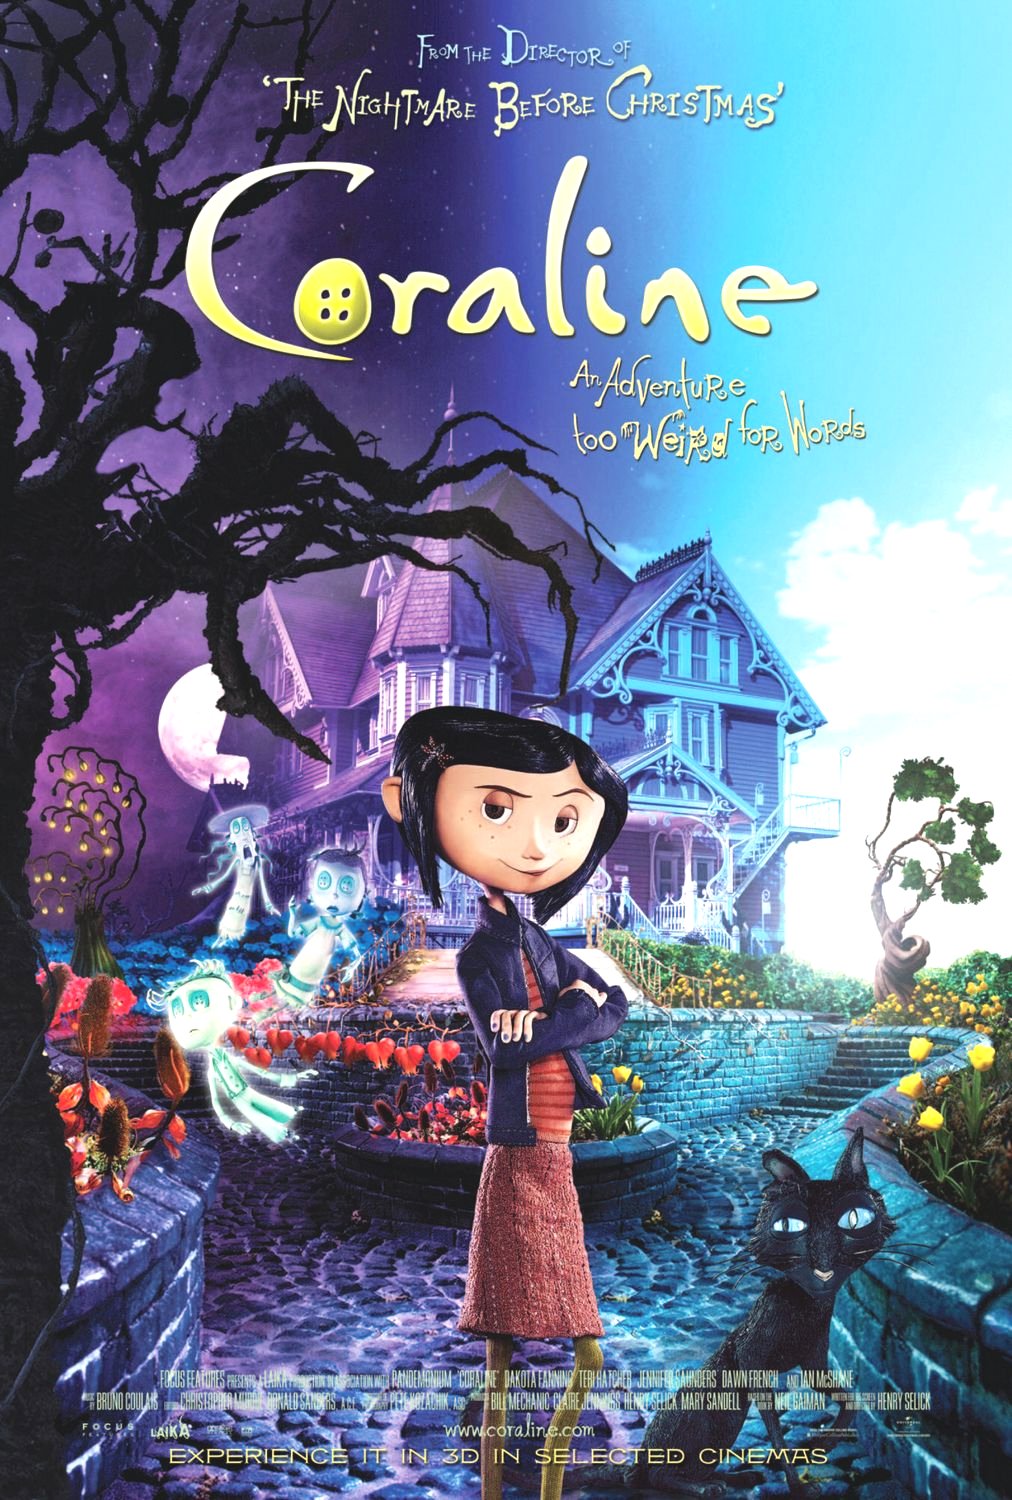 Coraline: An adventure too weird for words Google image from http://www.thefilminformant.com/wp/wp-content/uploads/2011/02/Coraline-Poster-2.jpeg